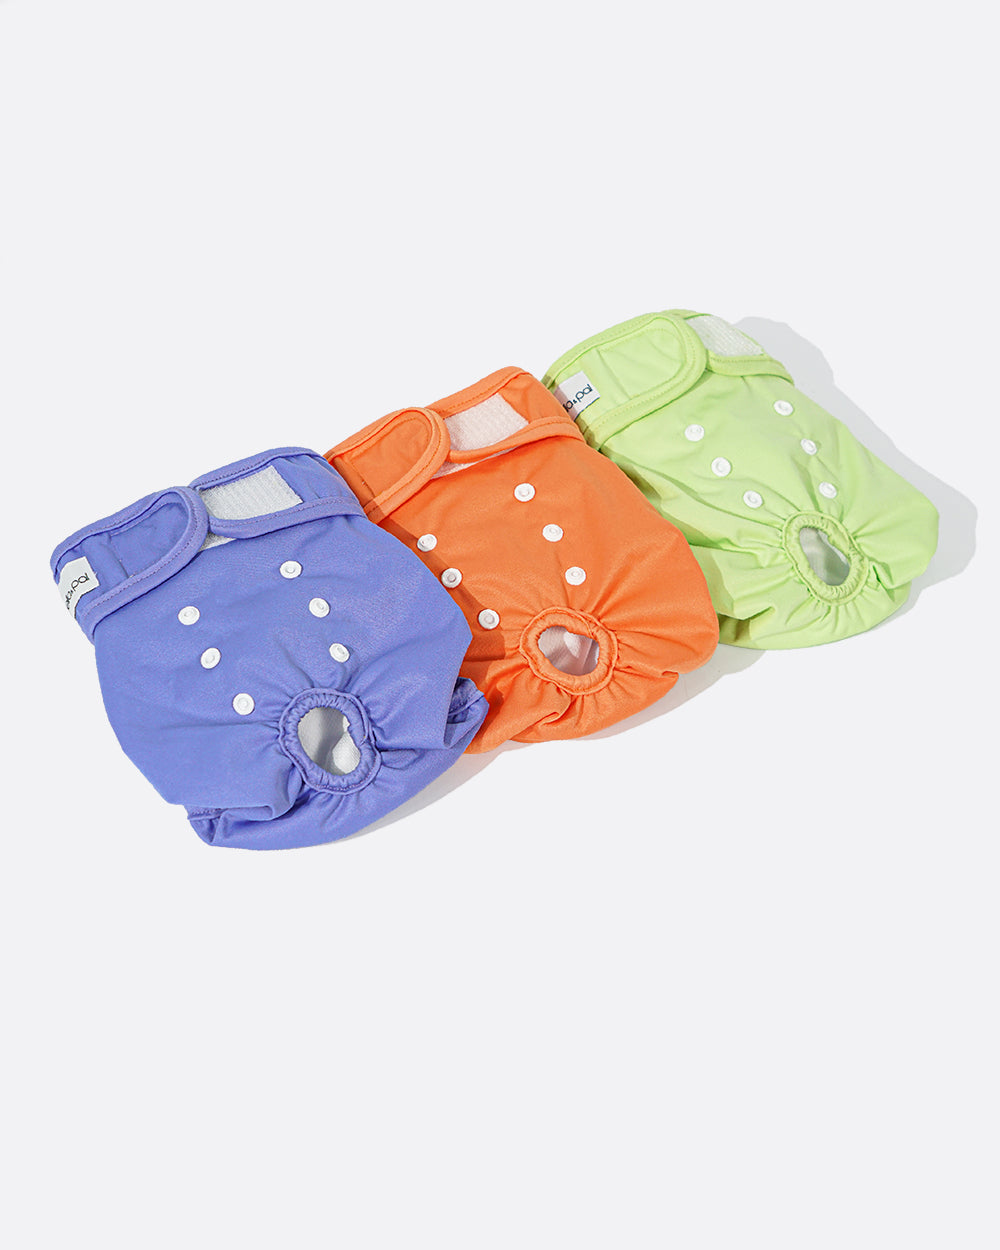 Washable Female Dog Diapers with Snaps - 3 Pack